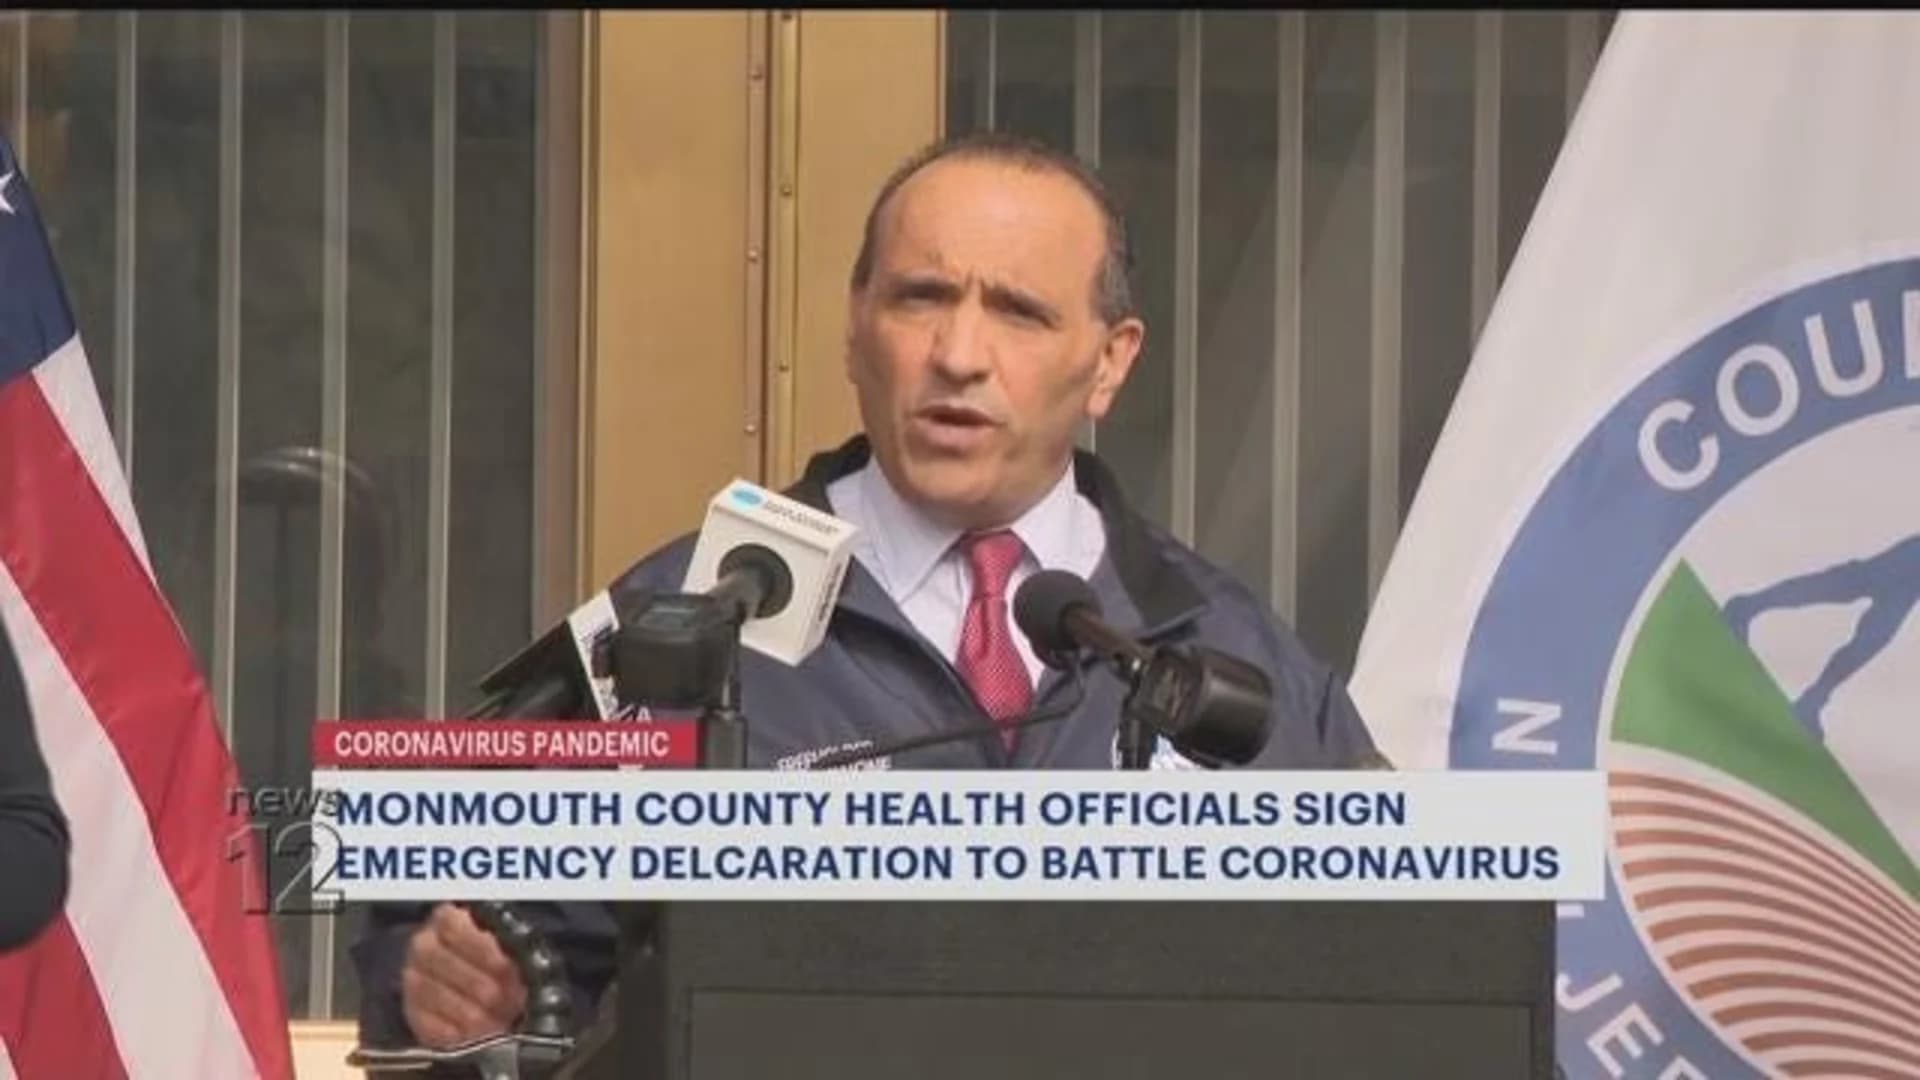 Monmouth County leaders provide update on county’s operations in response to COVID-19